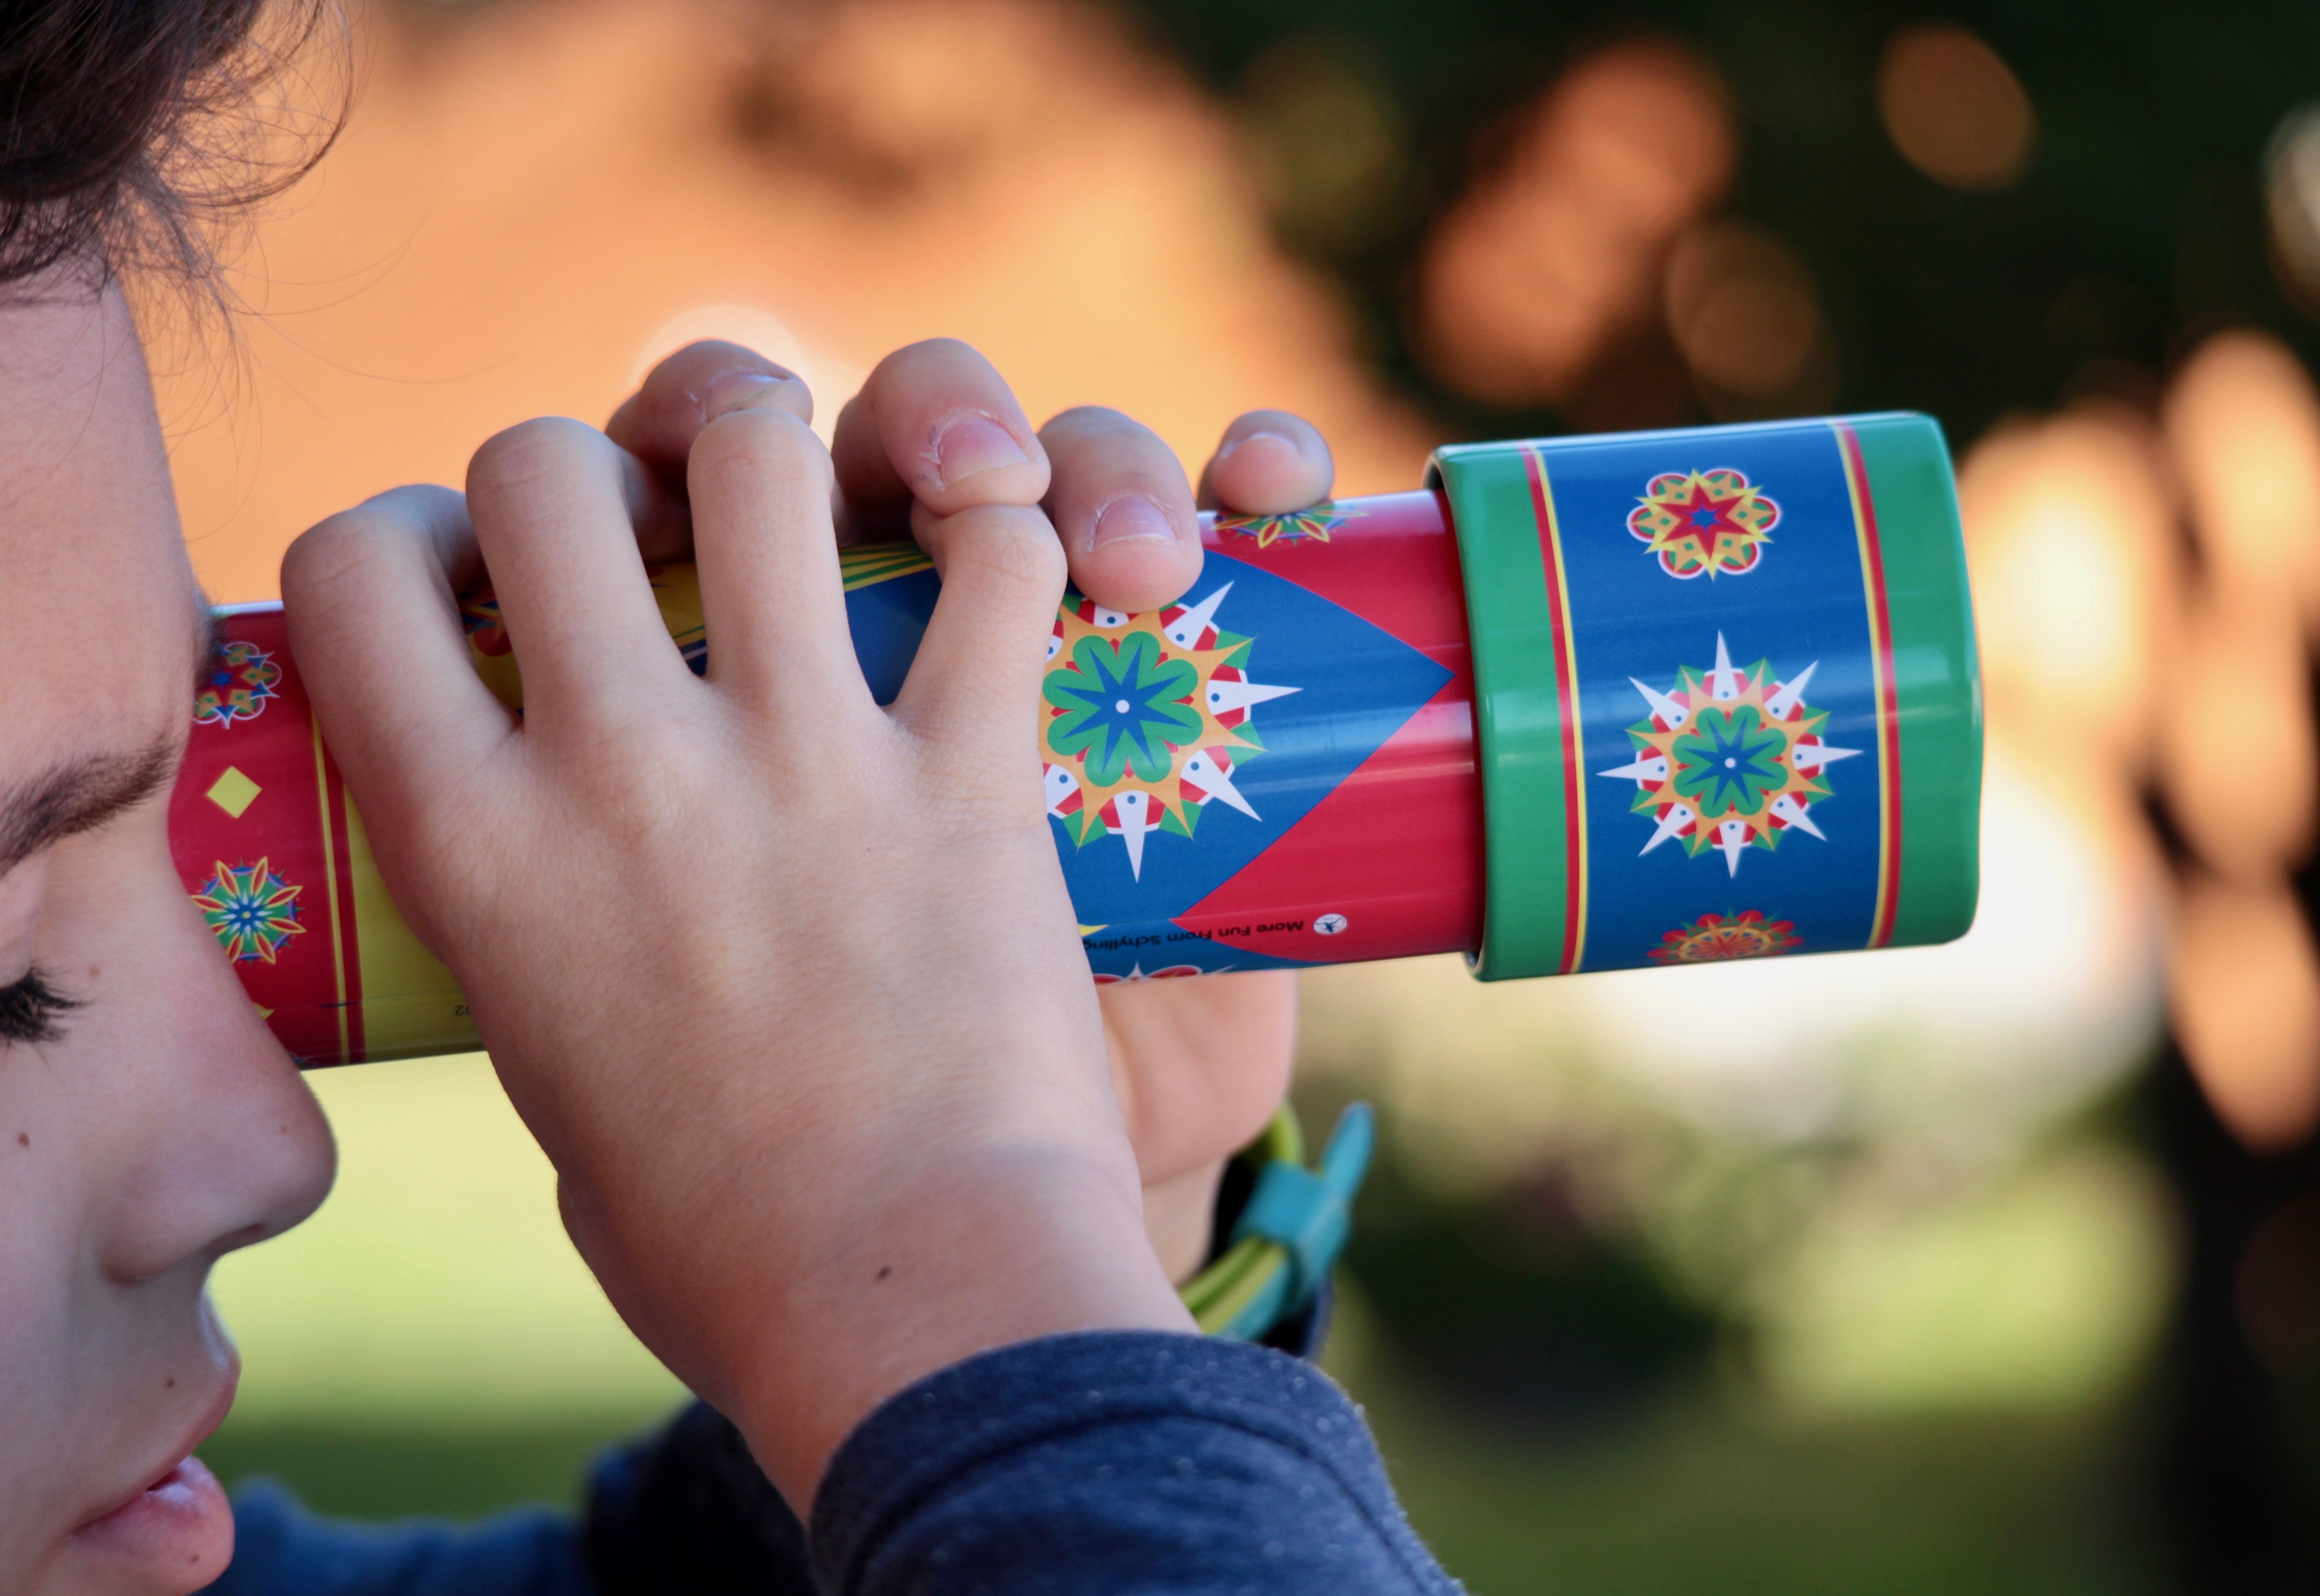 Young boy holding a kaleidoscope up to her eyes.